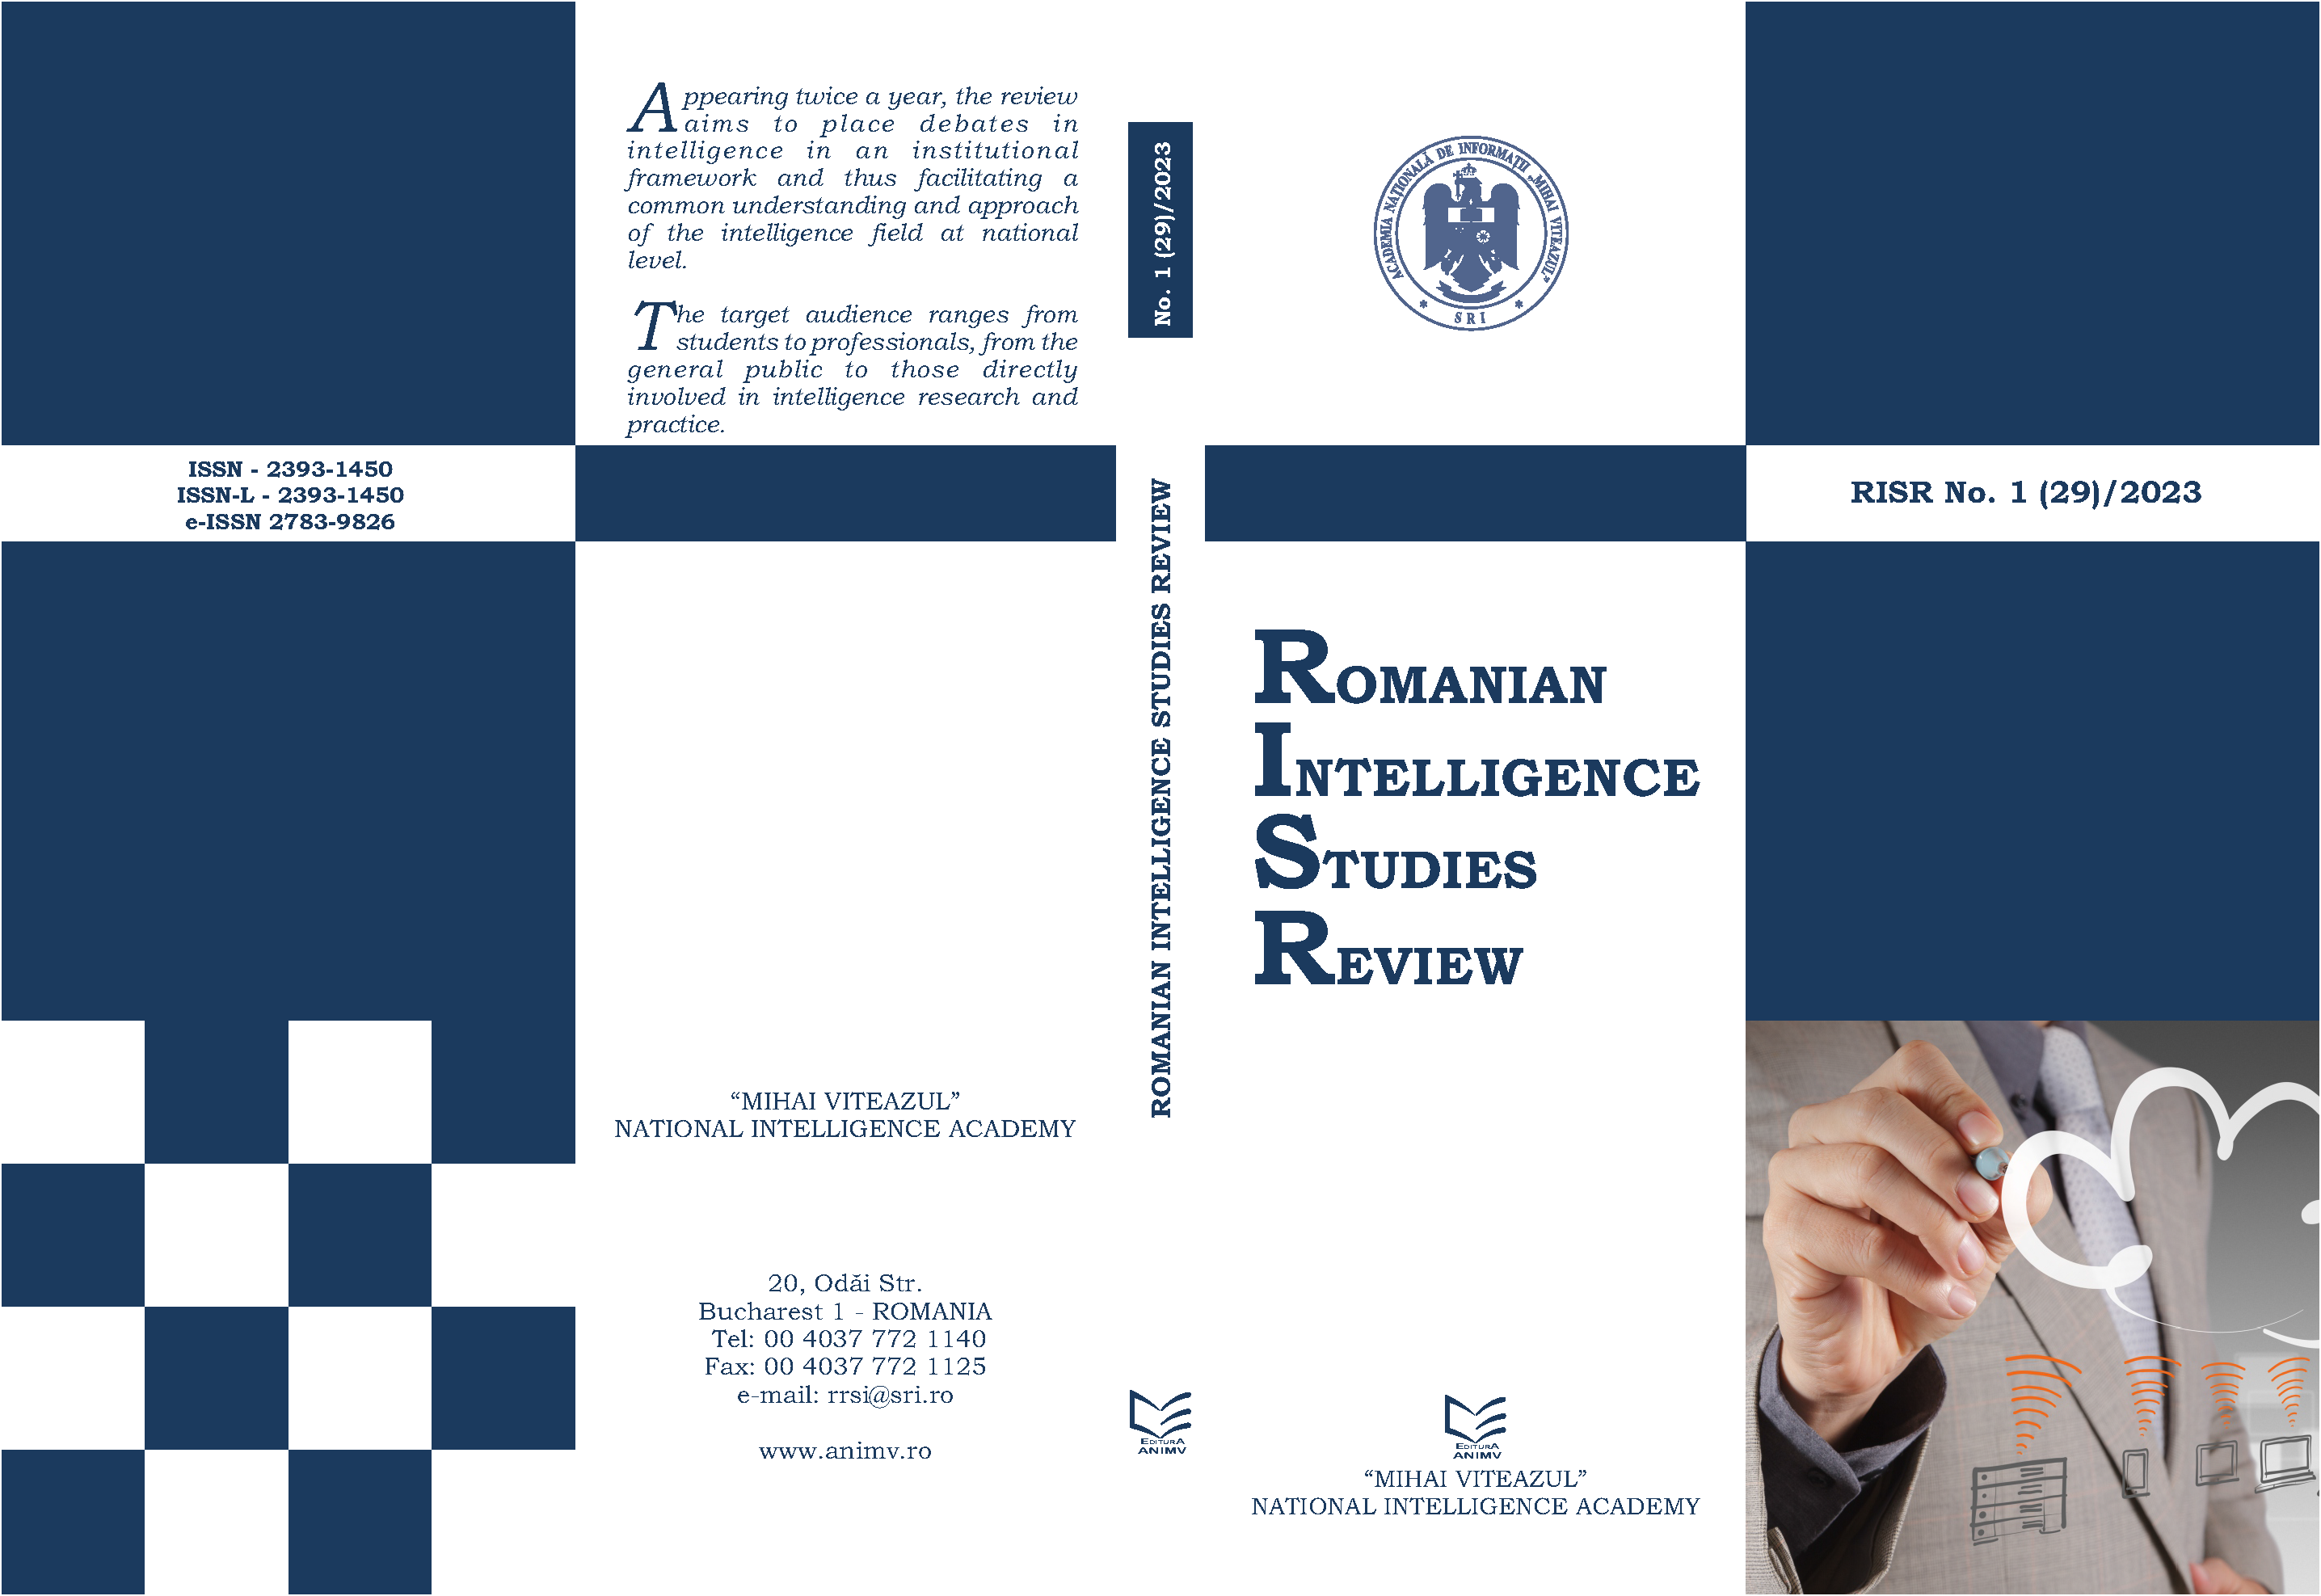 THE IMPERATIVES OF RESHAPING THE NATURE OF INTELLIGENCE TO ADDRESS THE 21ST CENTURY SECURITY CHALLENGES